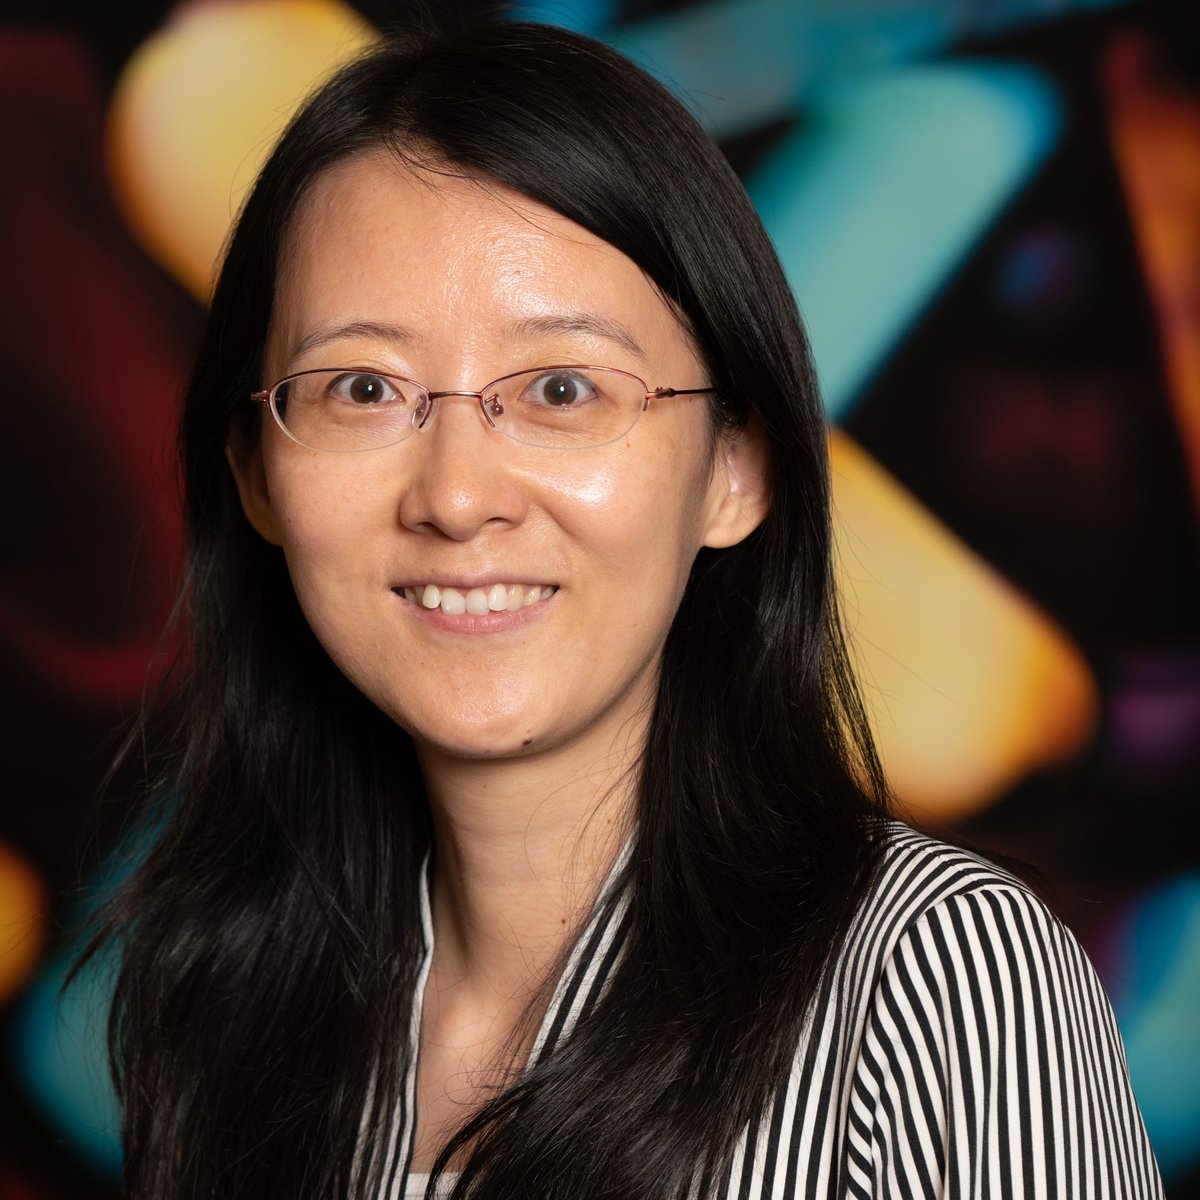 Memory loss is a devastating effect of #AlzheimersDisease. Dr. Yingxue Wang has been awarded a $1M @NIHAging grant to research memory formation and storage, and how cholinergic functional decline, as happens in Alzheimer's, impacts these mechanisms. mpfi.org/mpfis-wang-lab…